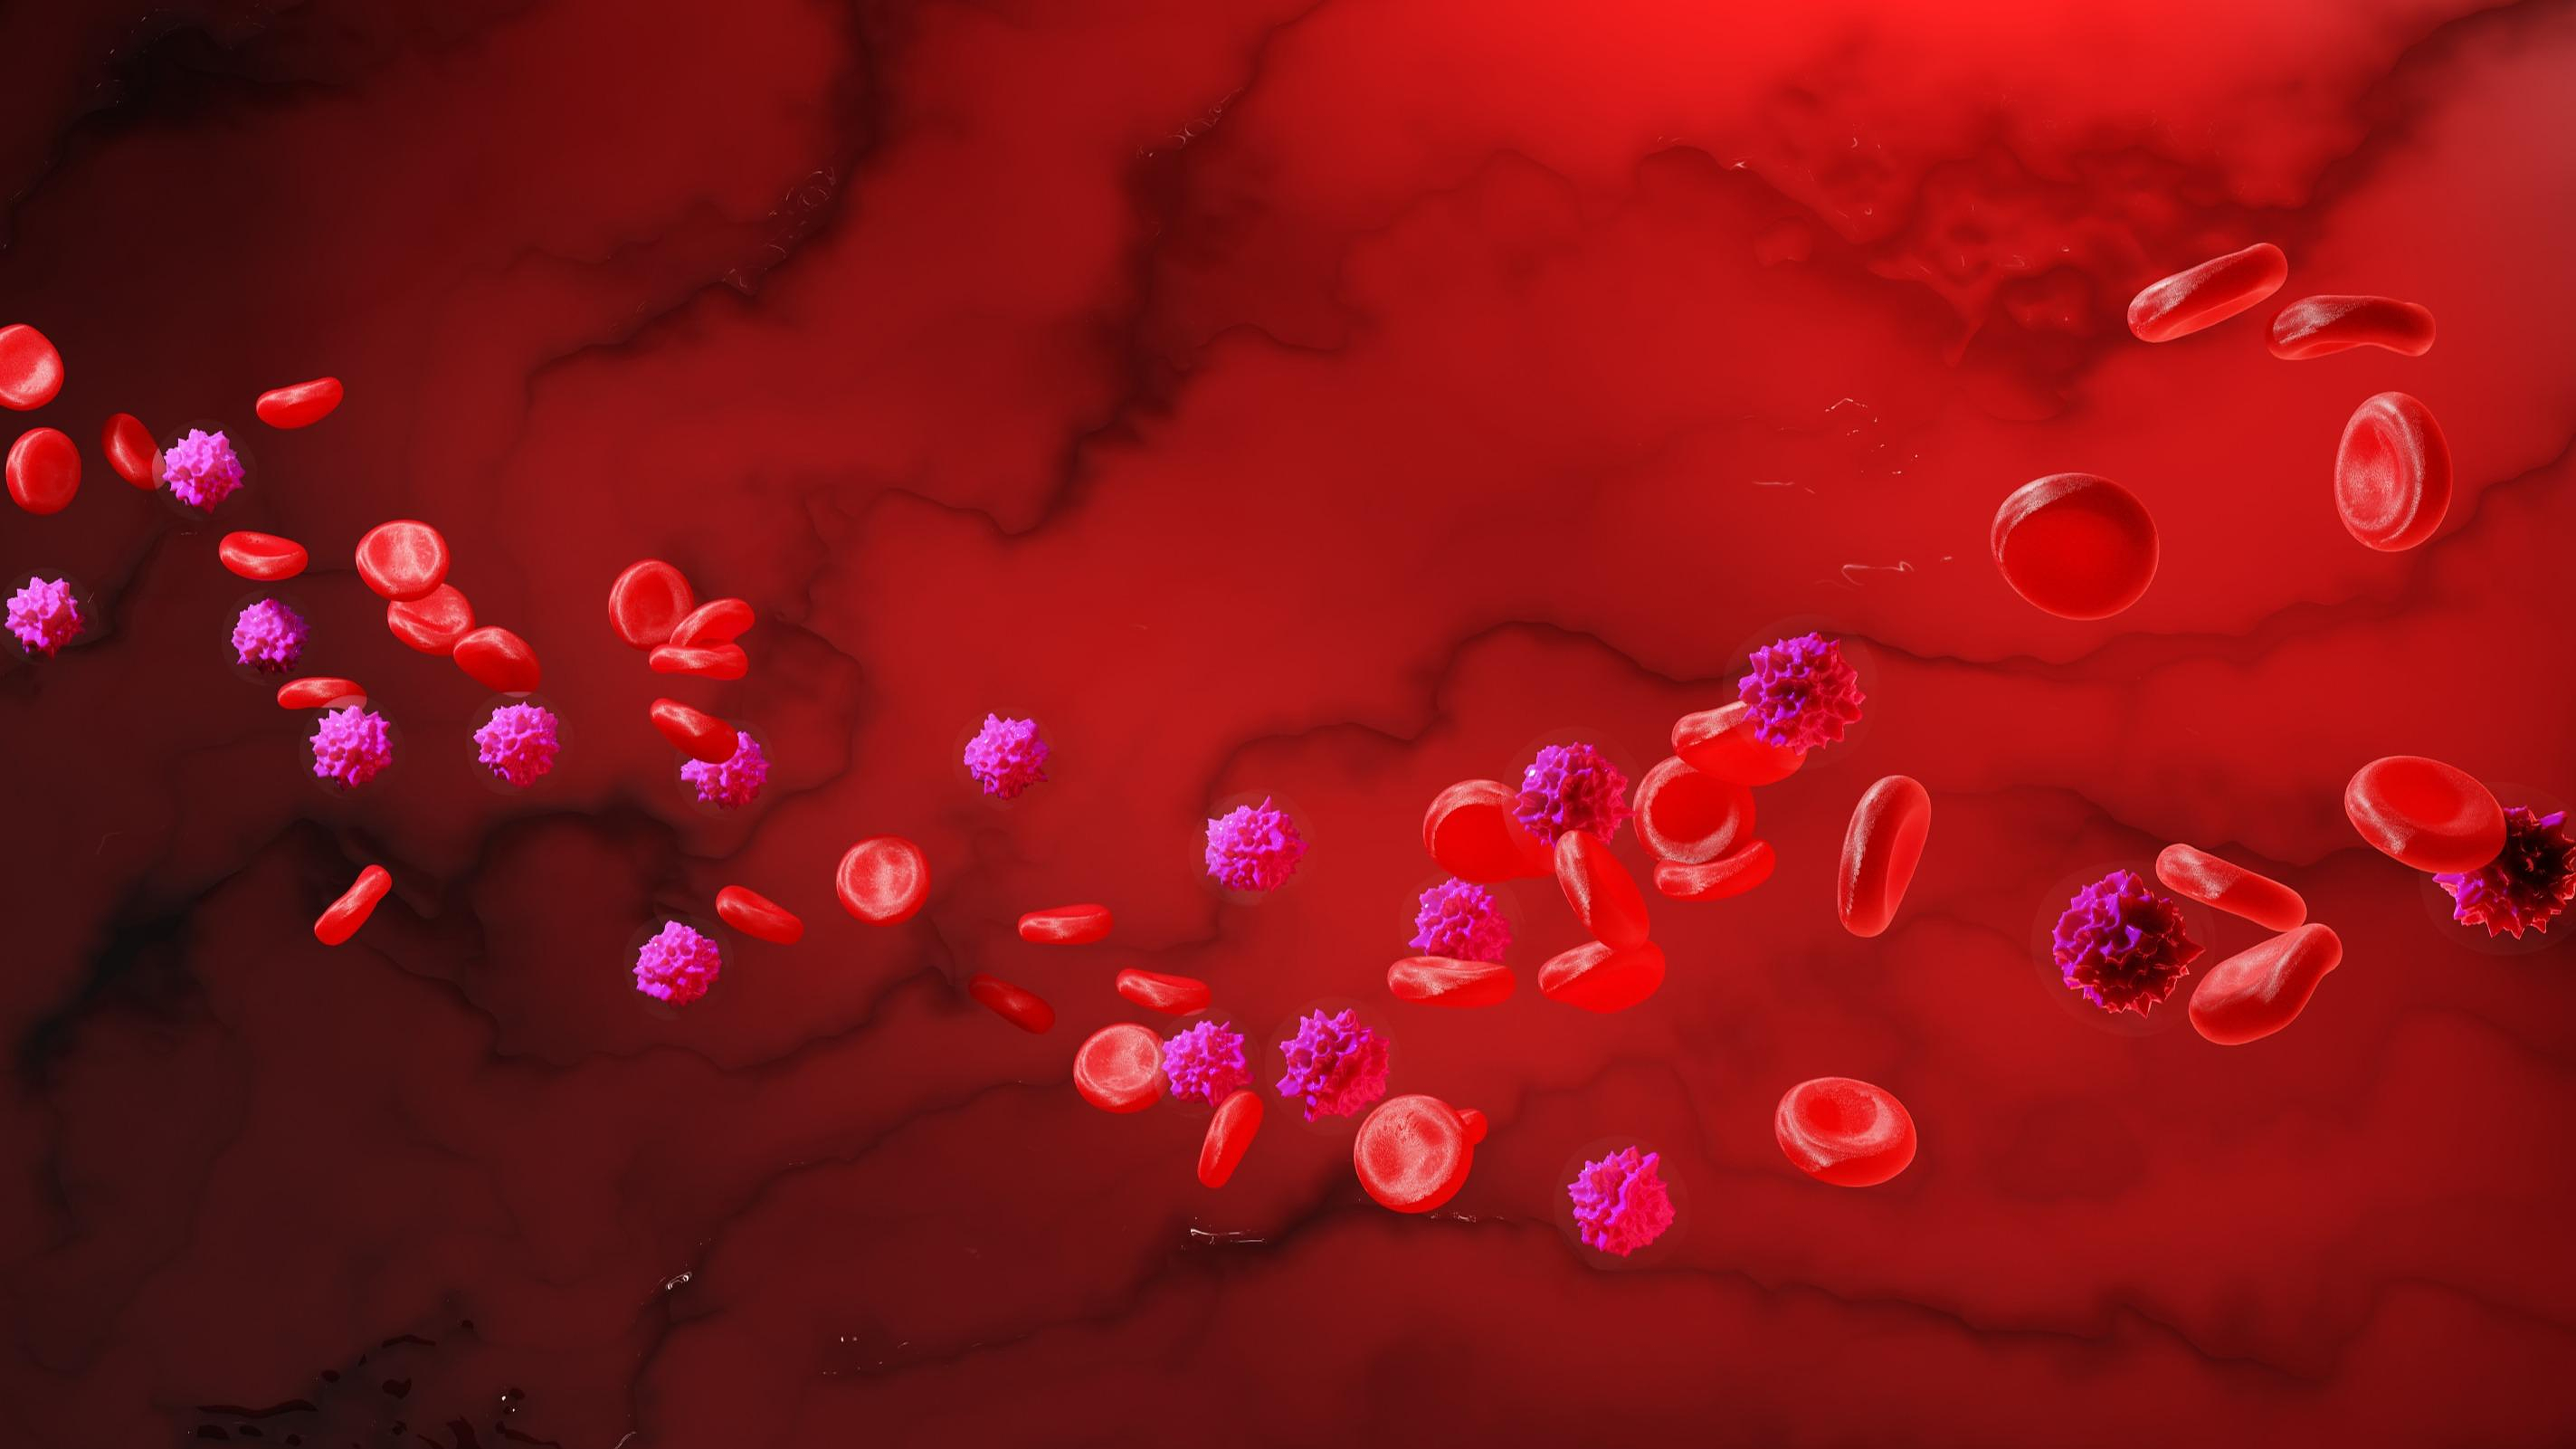 Blood stem cells, immune sentinels at the dawn of a therapeutic revolution